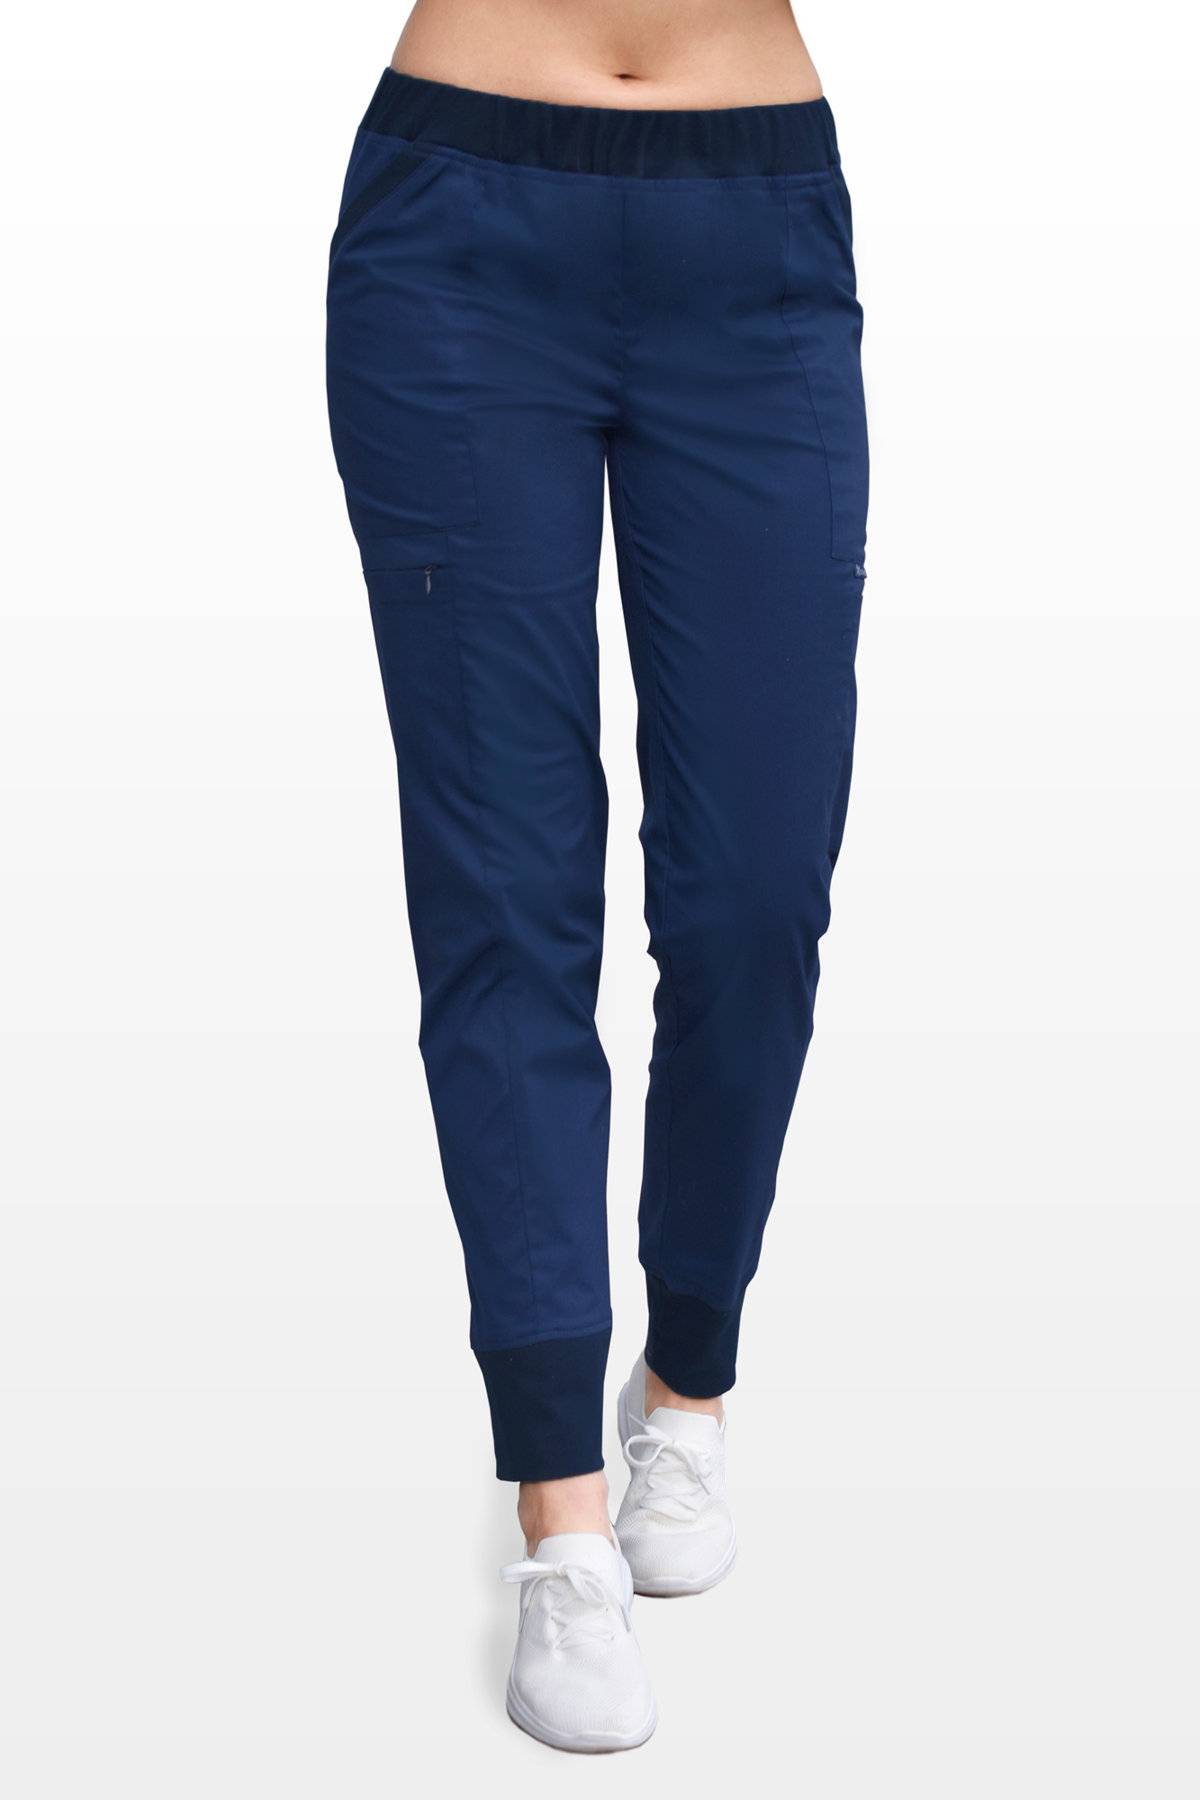 Medical STRETCH, pants blue lime, | + clothes SOFT SE4-G2 stripe, with Scrubs a navy COLORMED